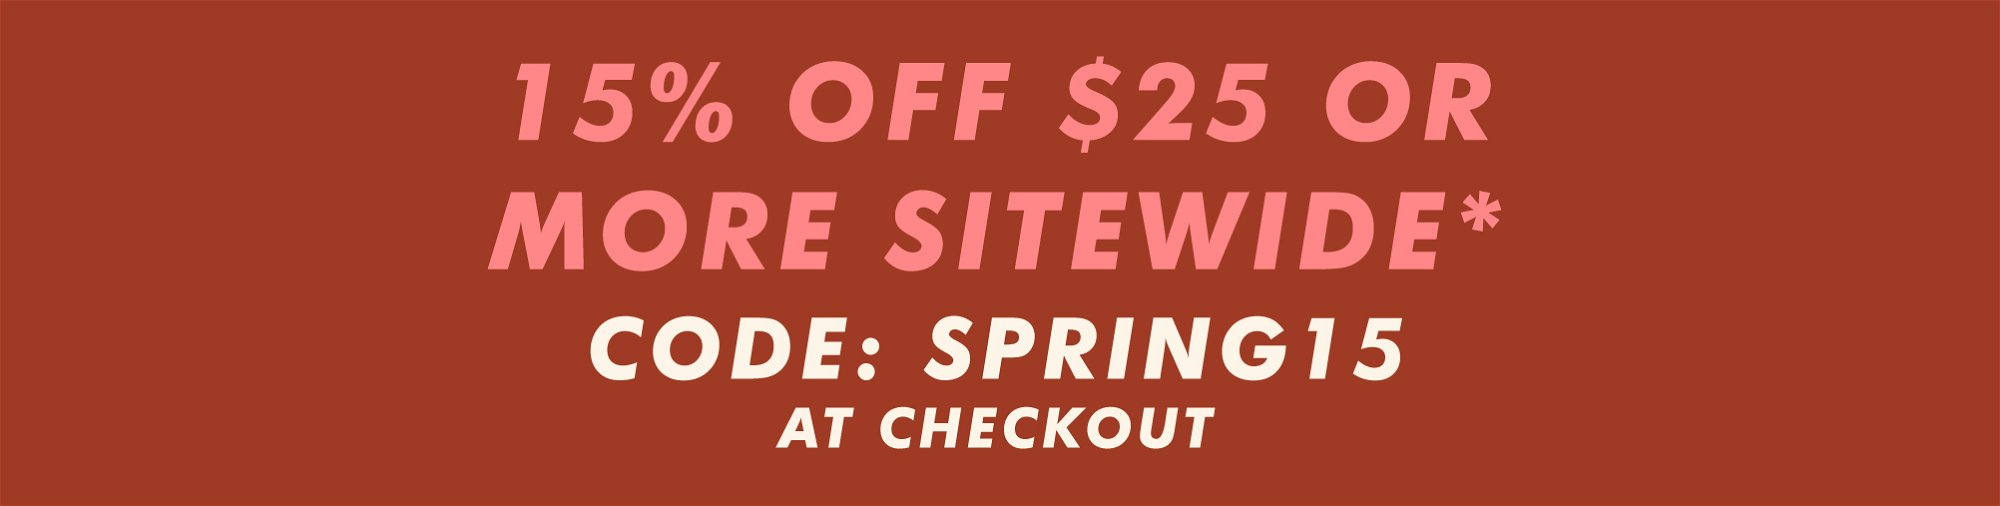 15% off $25 or more sitewide with code SPRING15 at checkout